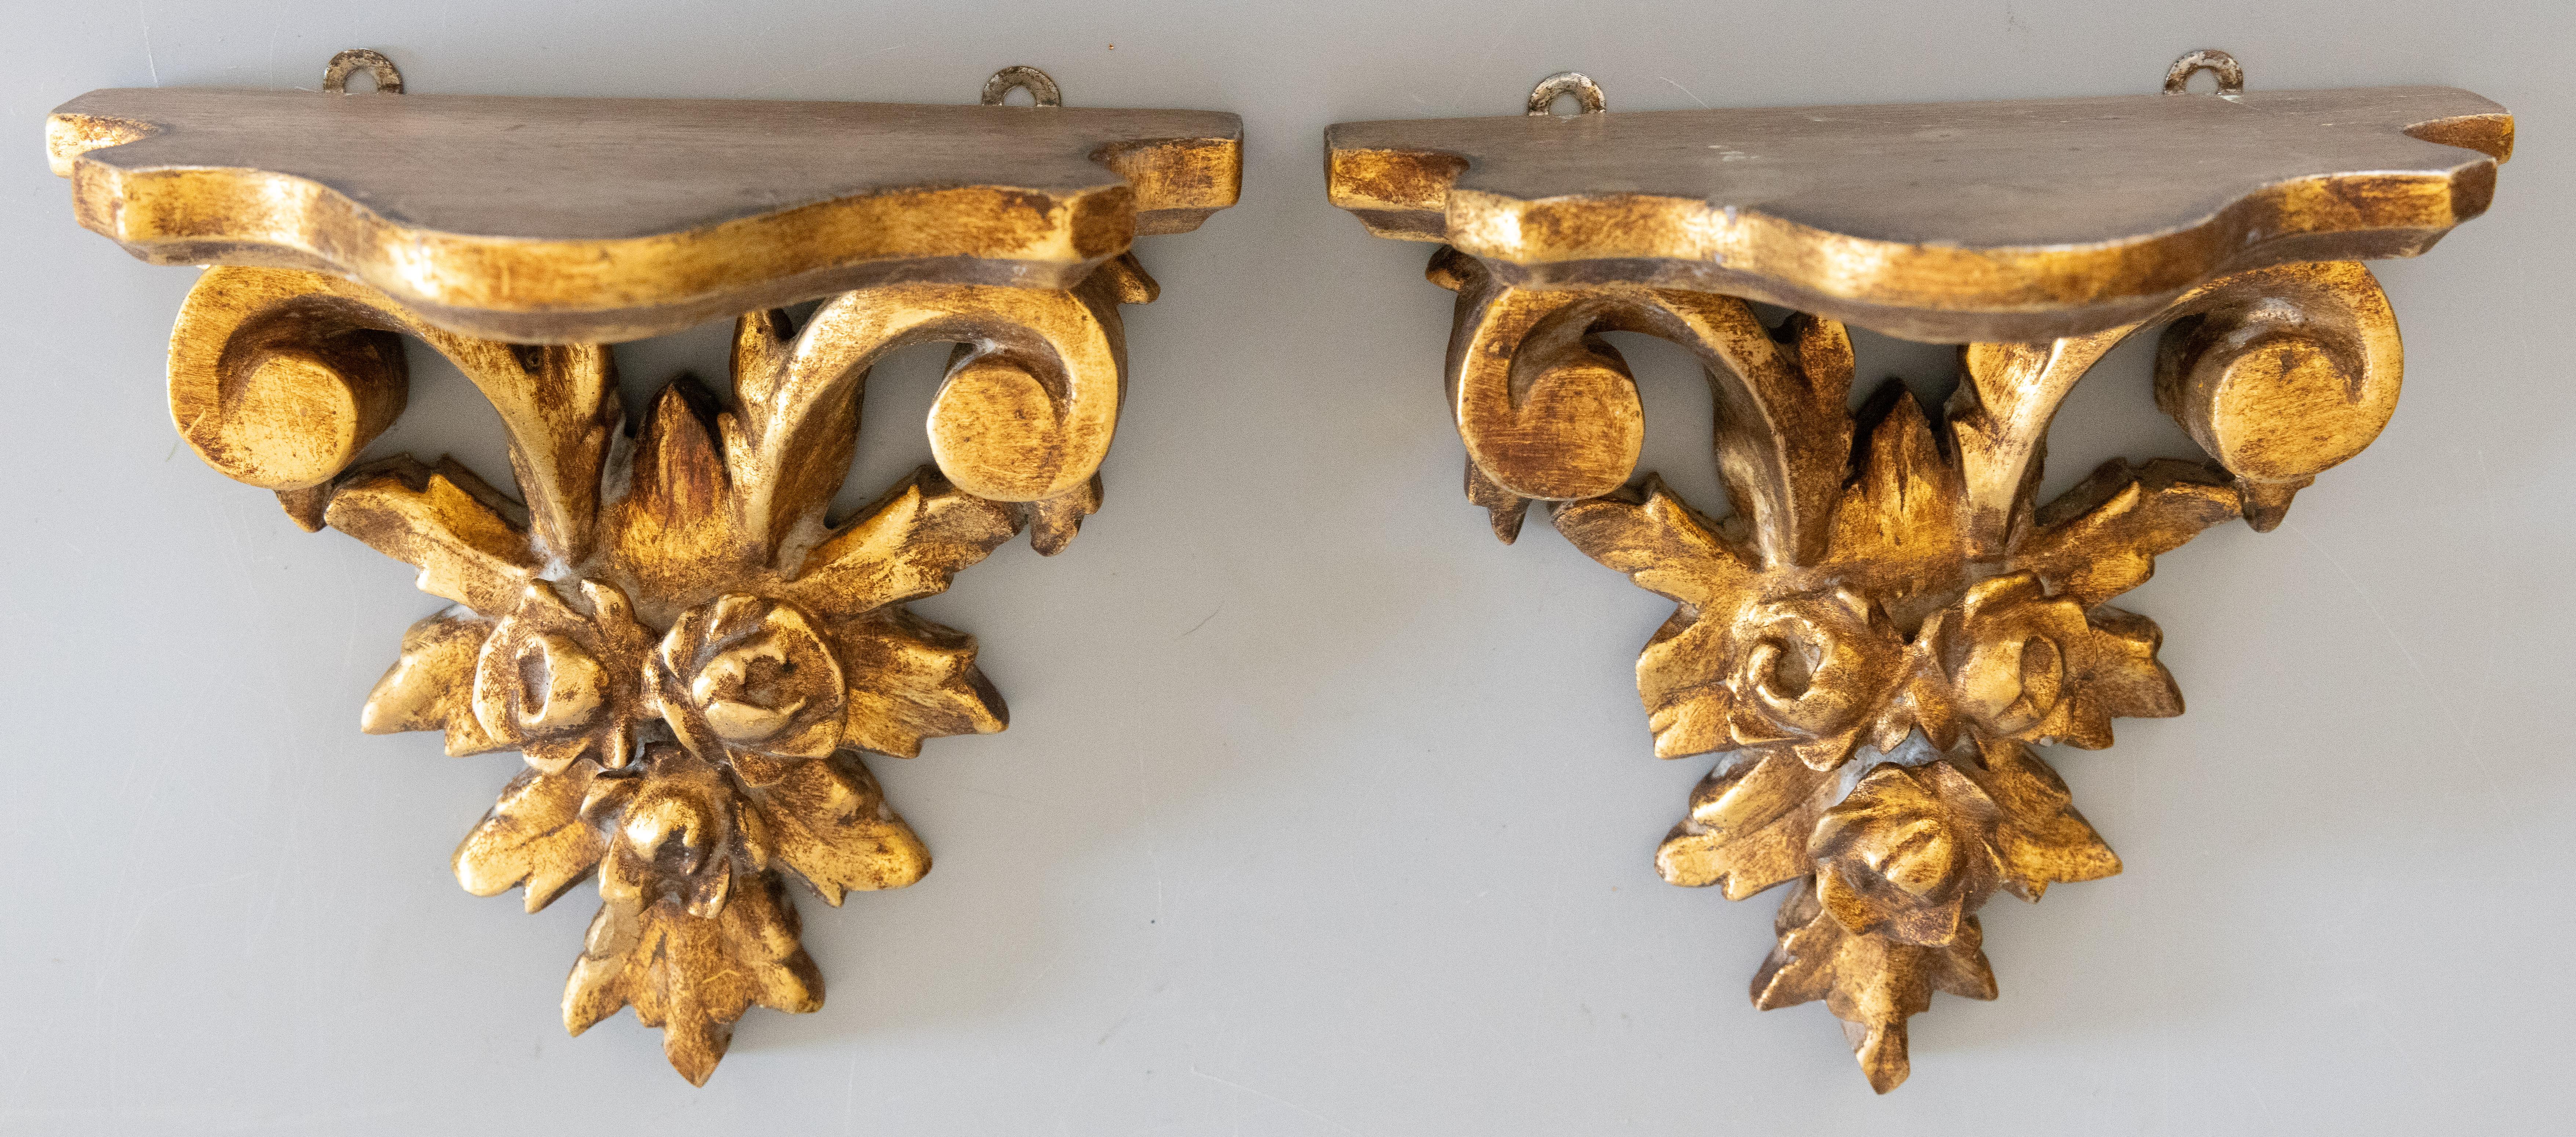 Hollywood Regency Pair of Mid-20th Century Italian Giltwood Roses Wall Brackets Shelves For Sale